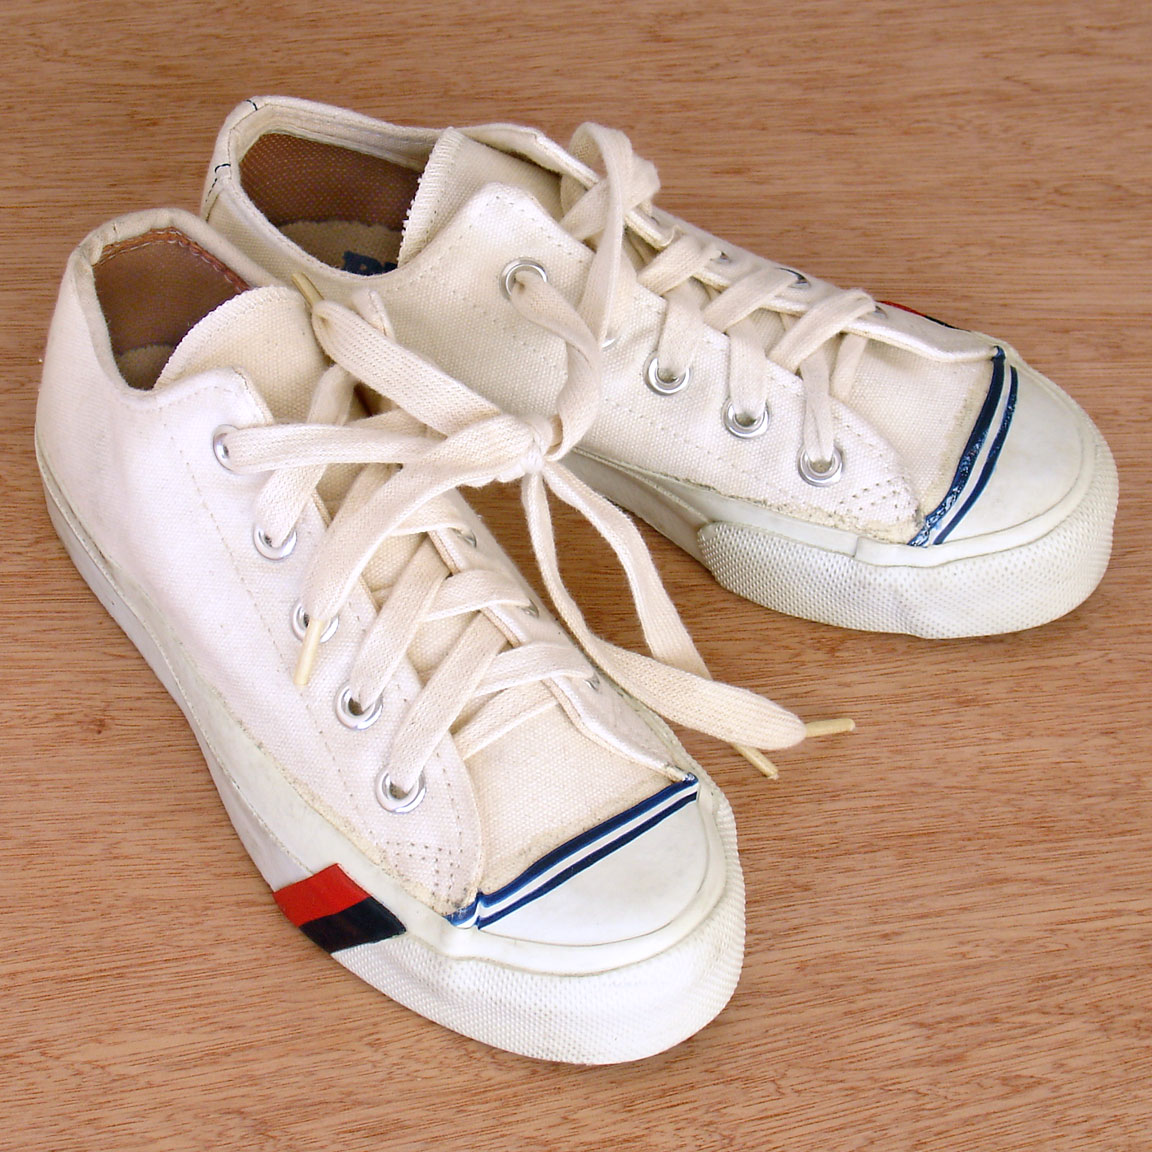 Vintage American-made Keds tennis shoes for sale at http://www.collectornet.net/shoes